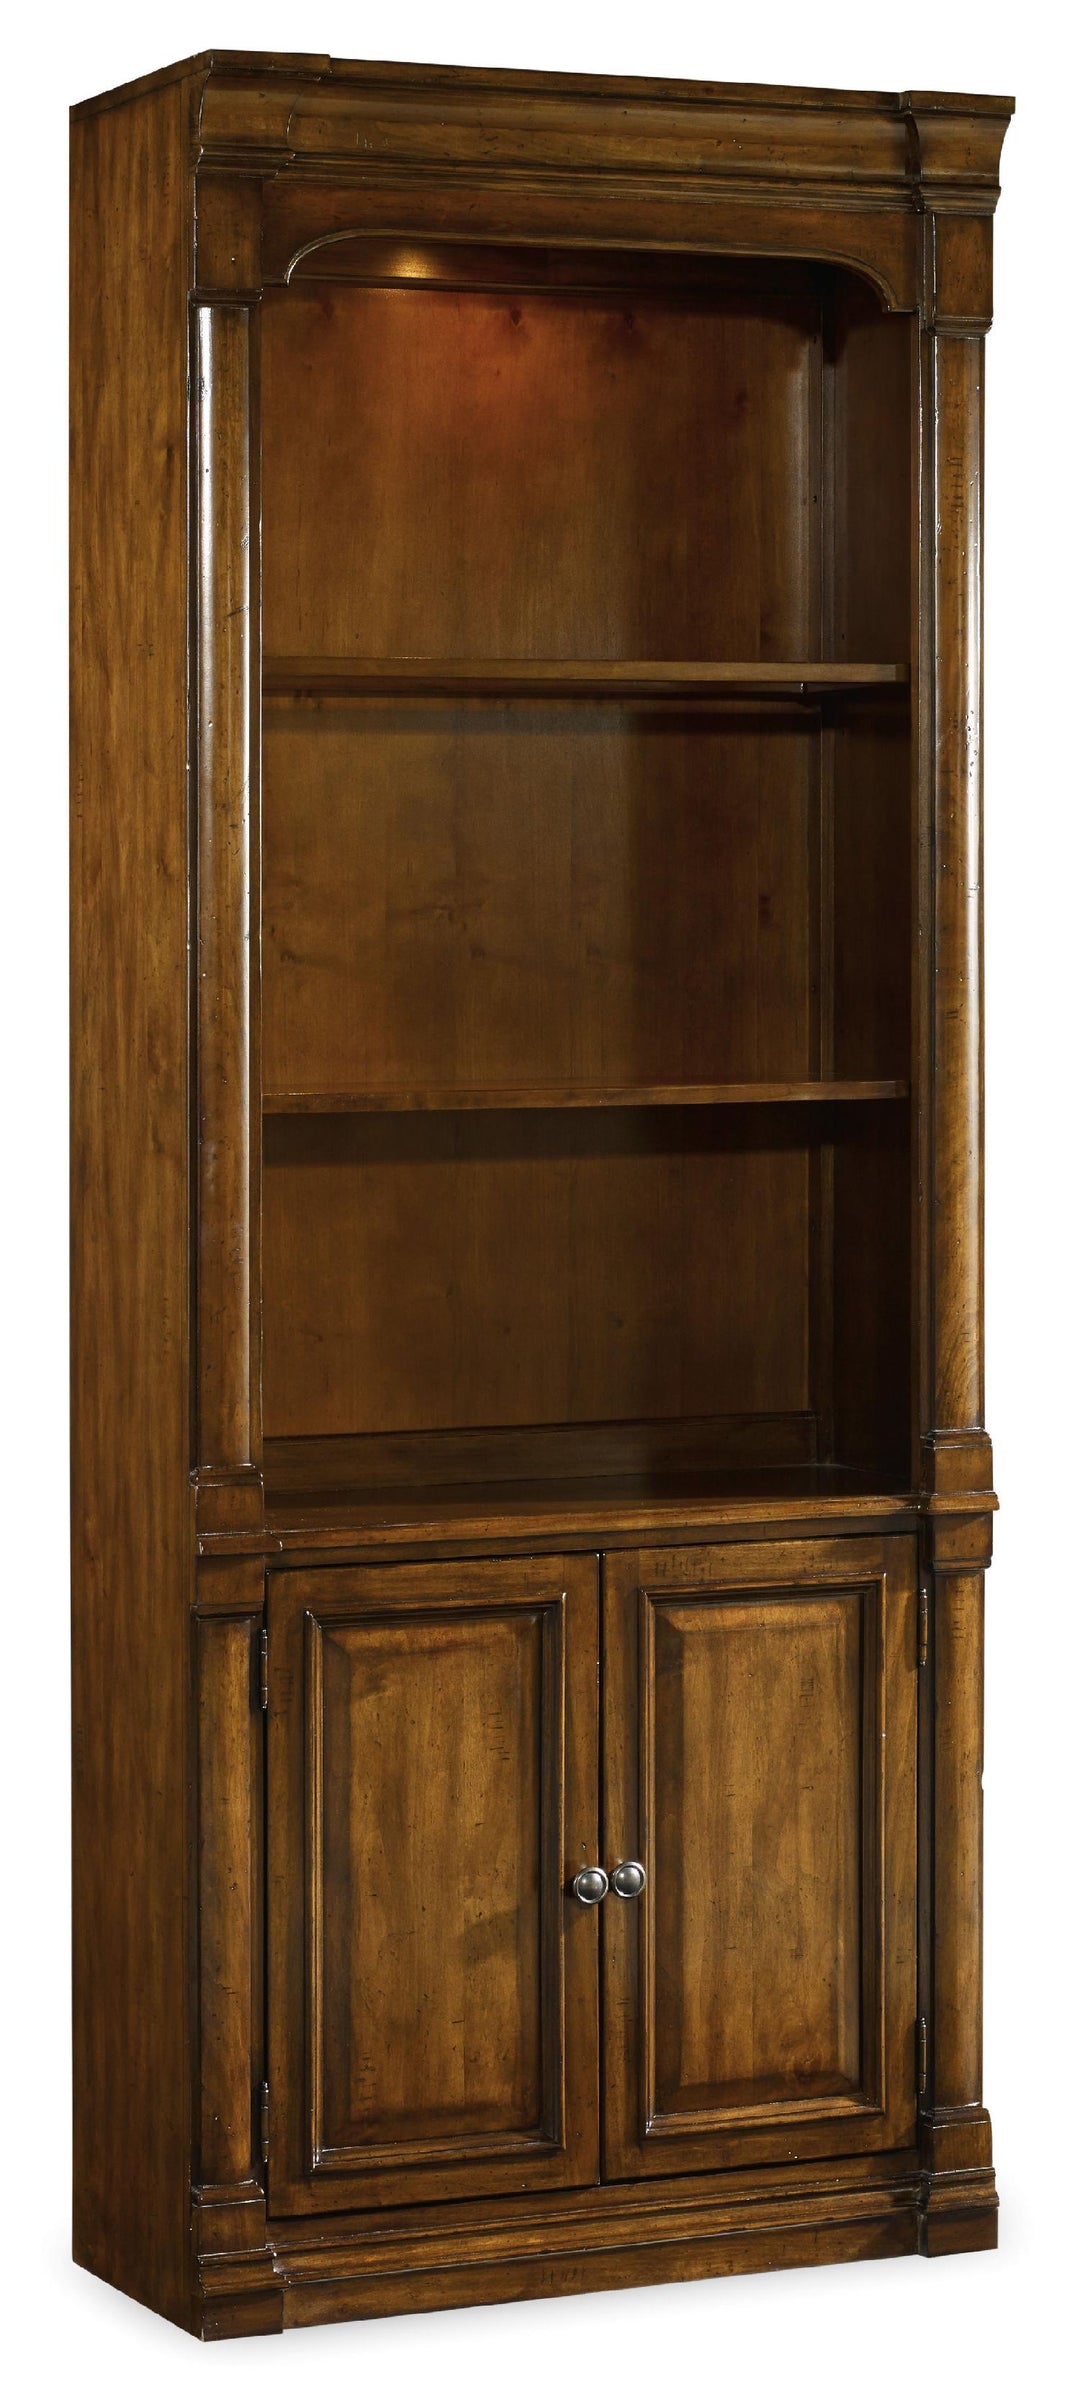 American Home Furniture | Hooker Furniture - Tynecastle Bunching Bookcase